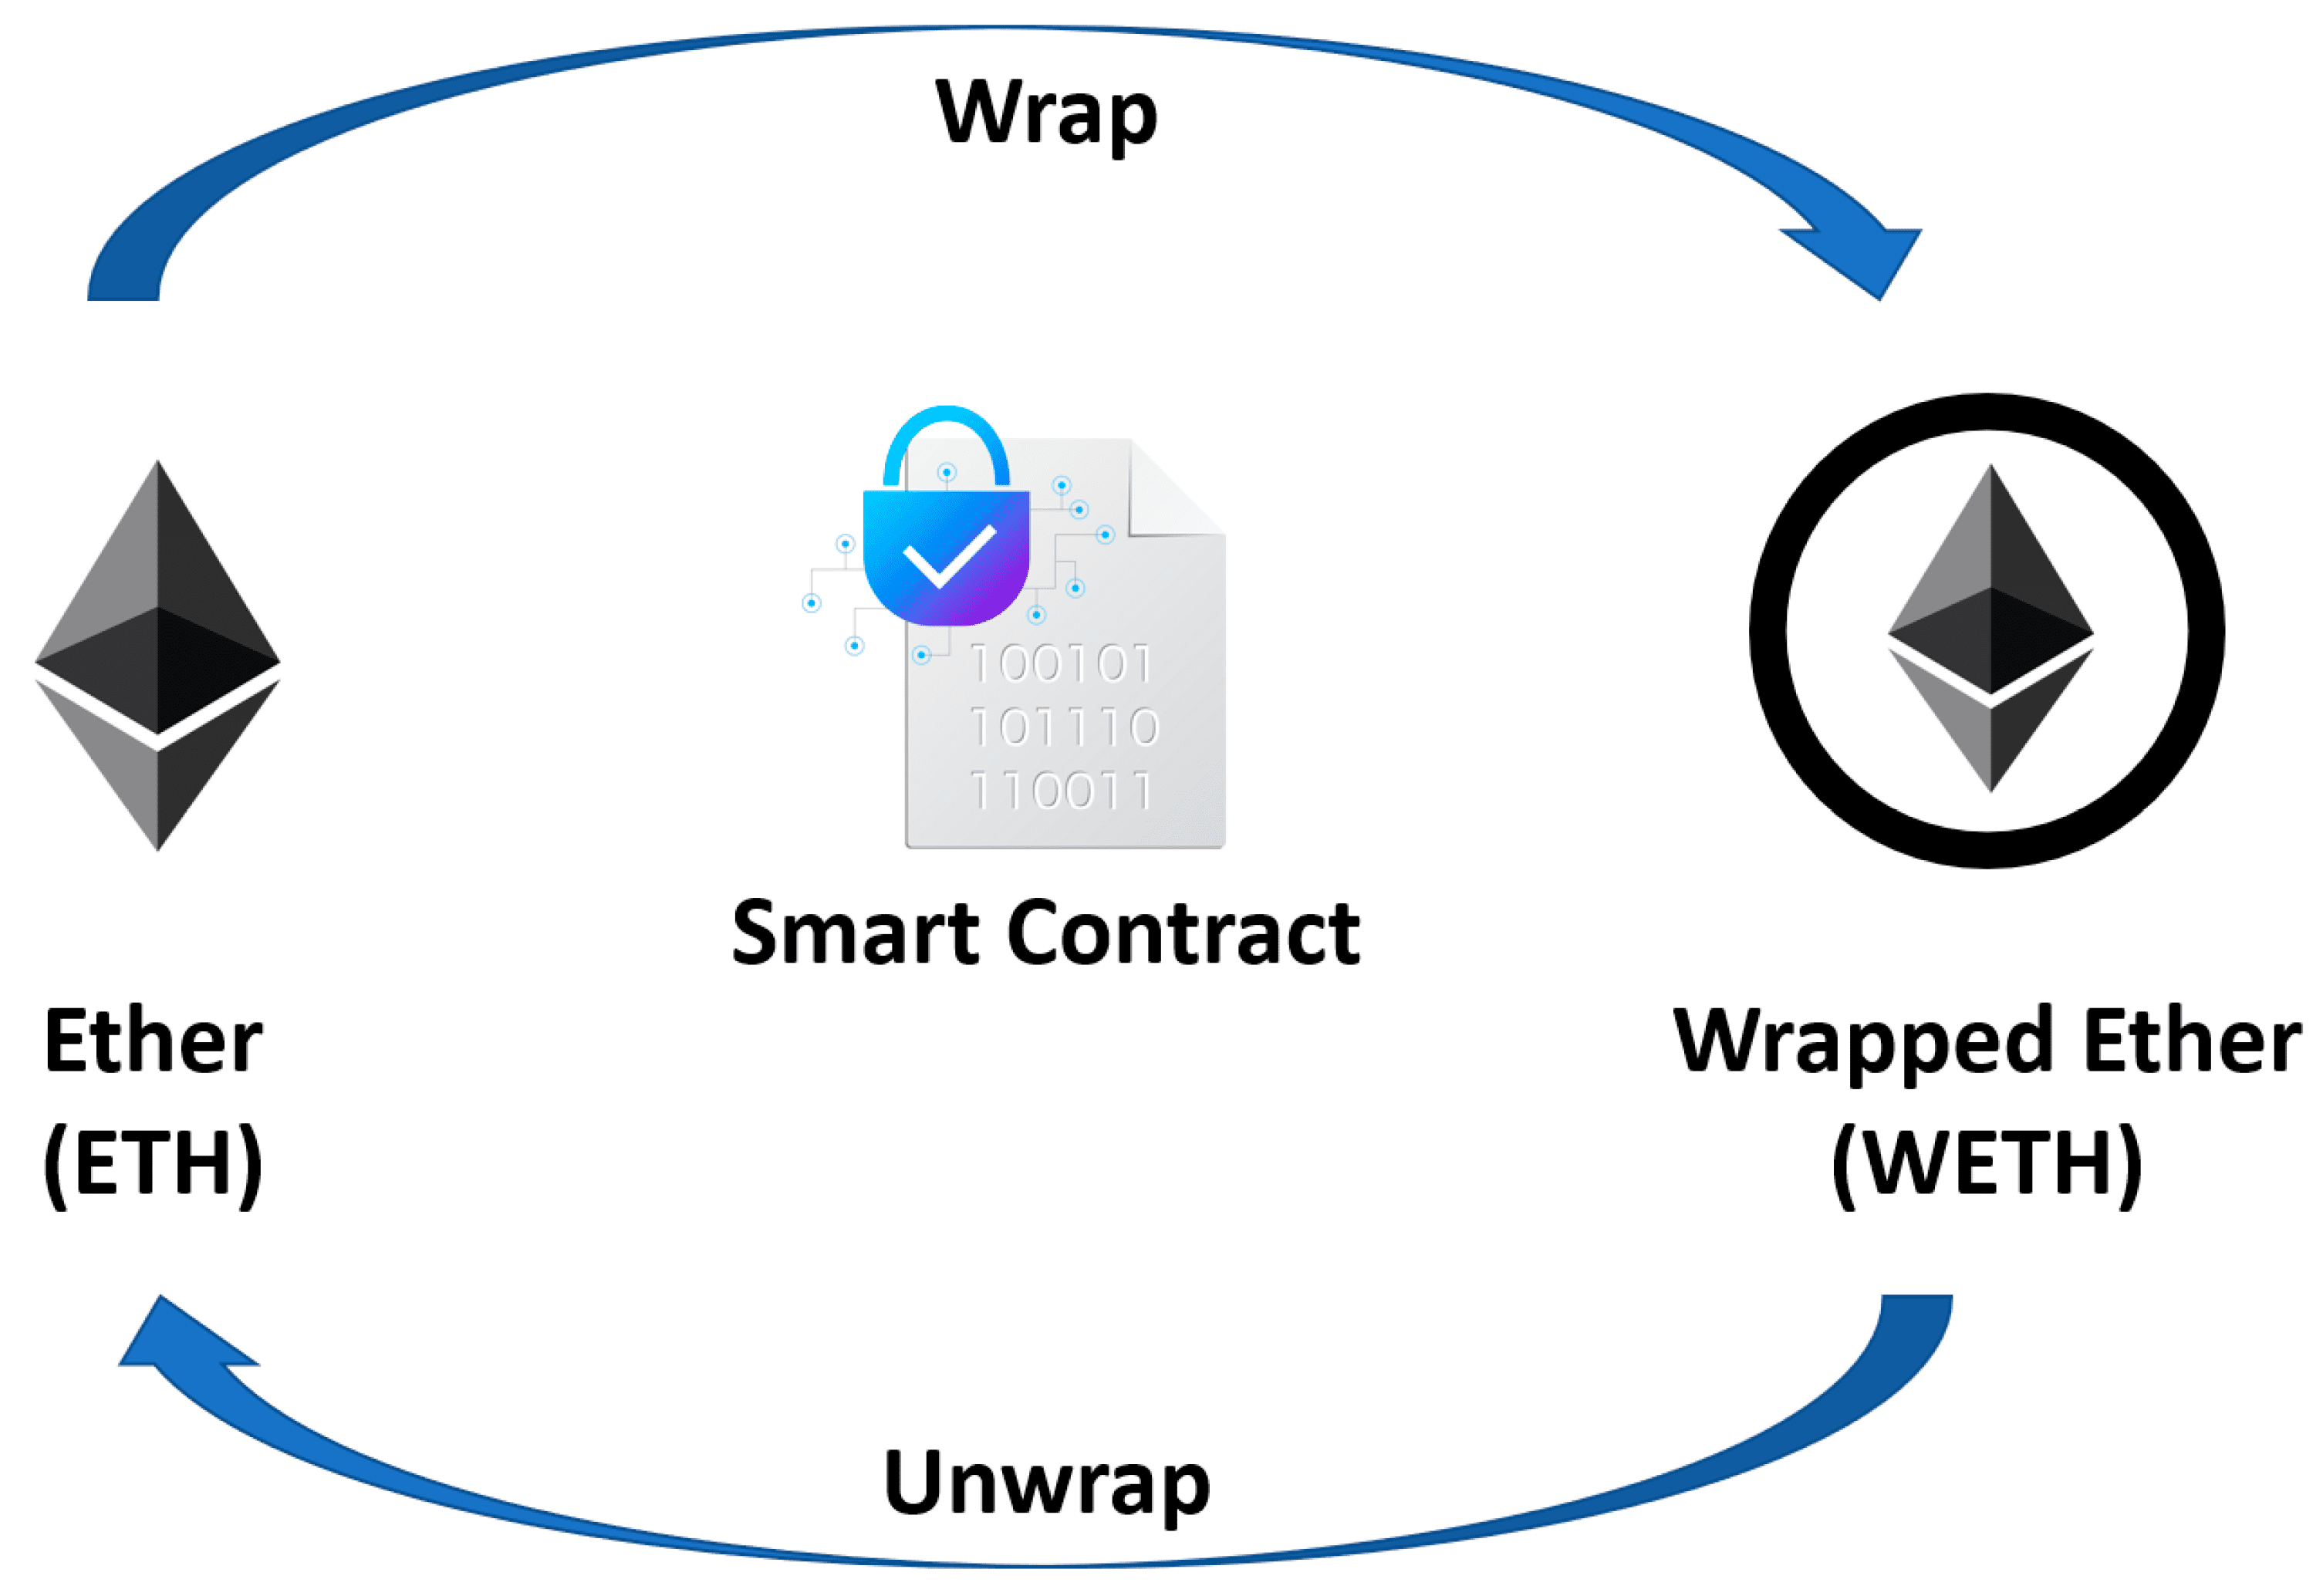 Wanna learn the difference between Bitcoin and Wrapped Bitcoin? Let’s dive into the wrapped tokens technology and determine its fundamental principles, benefits, and use cases.